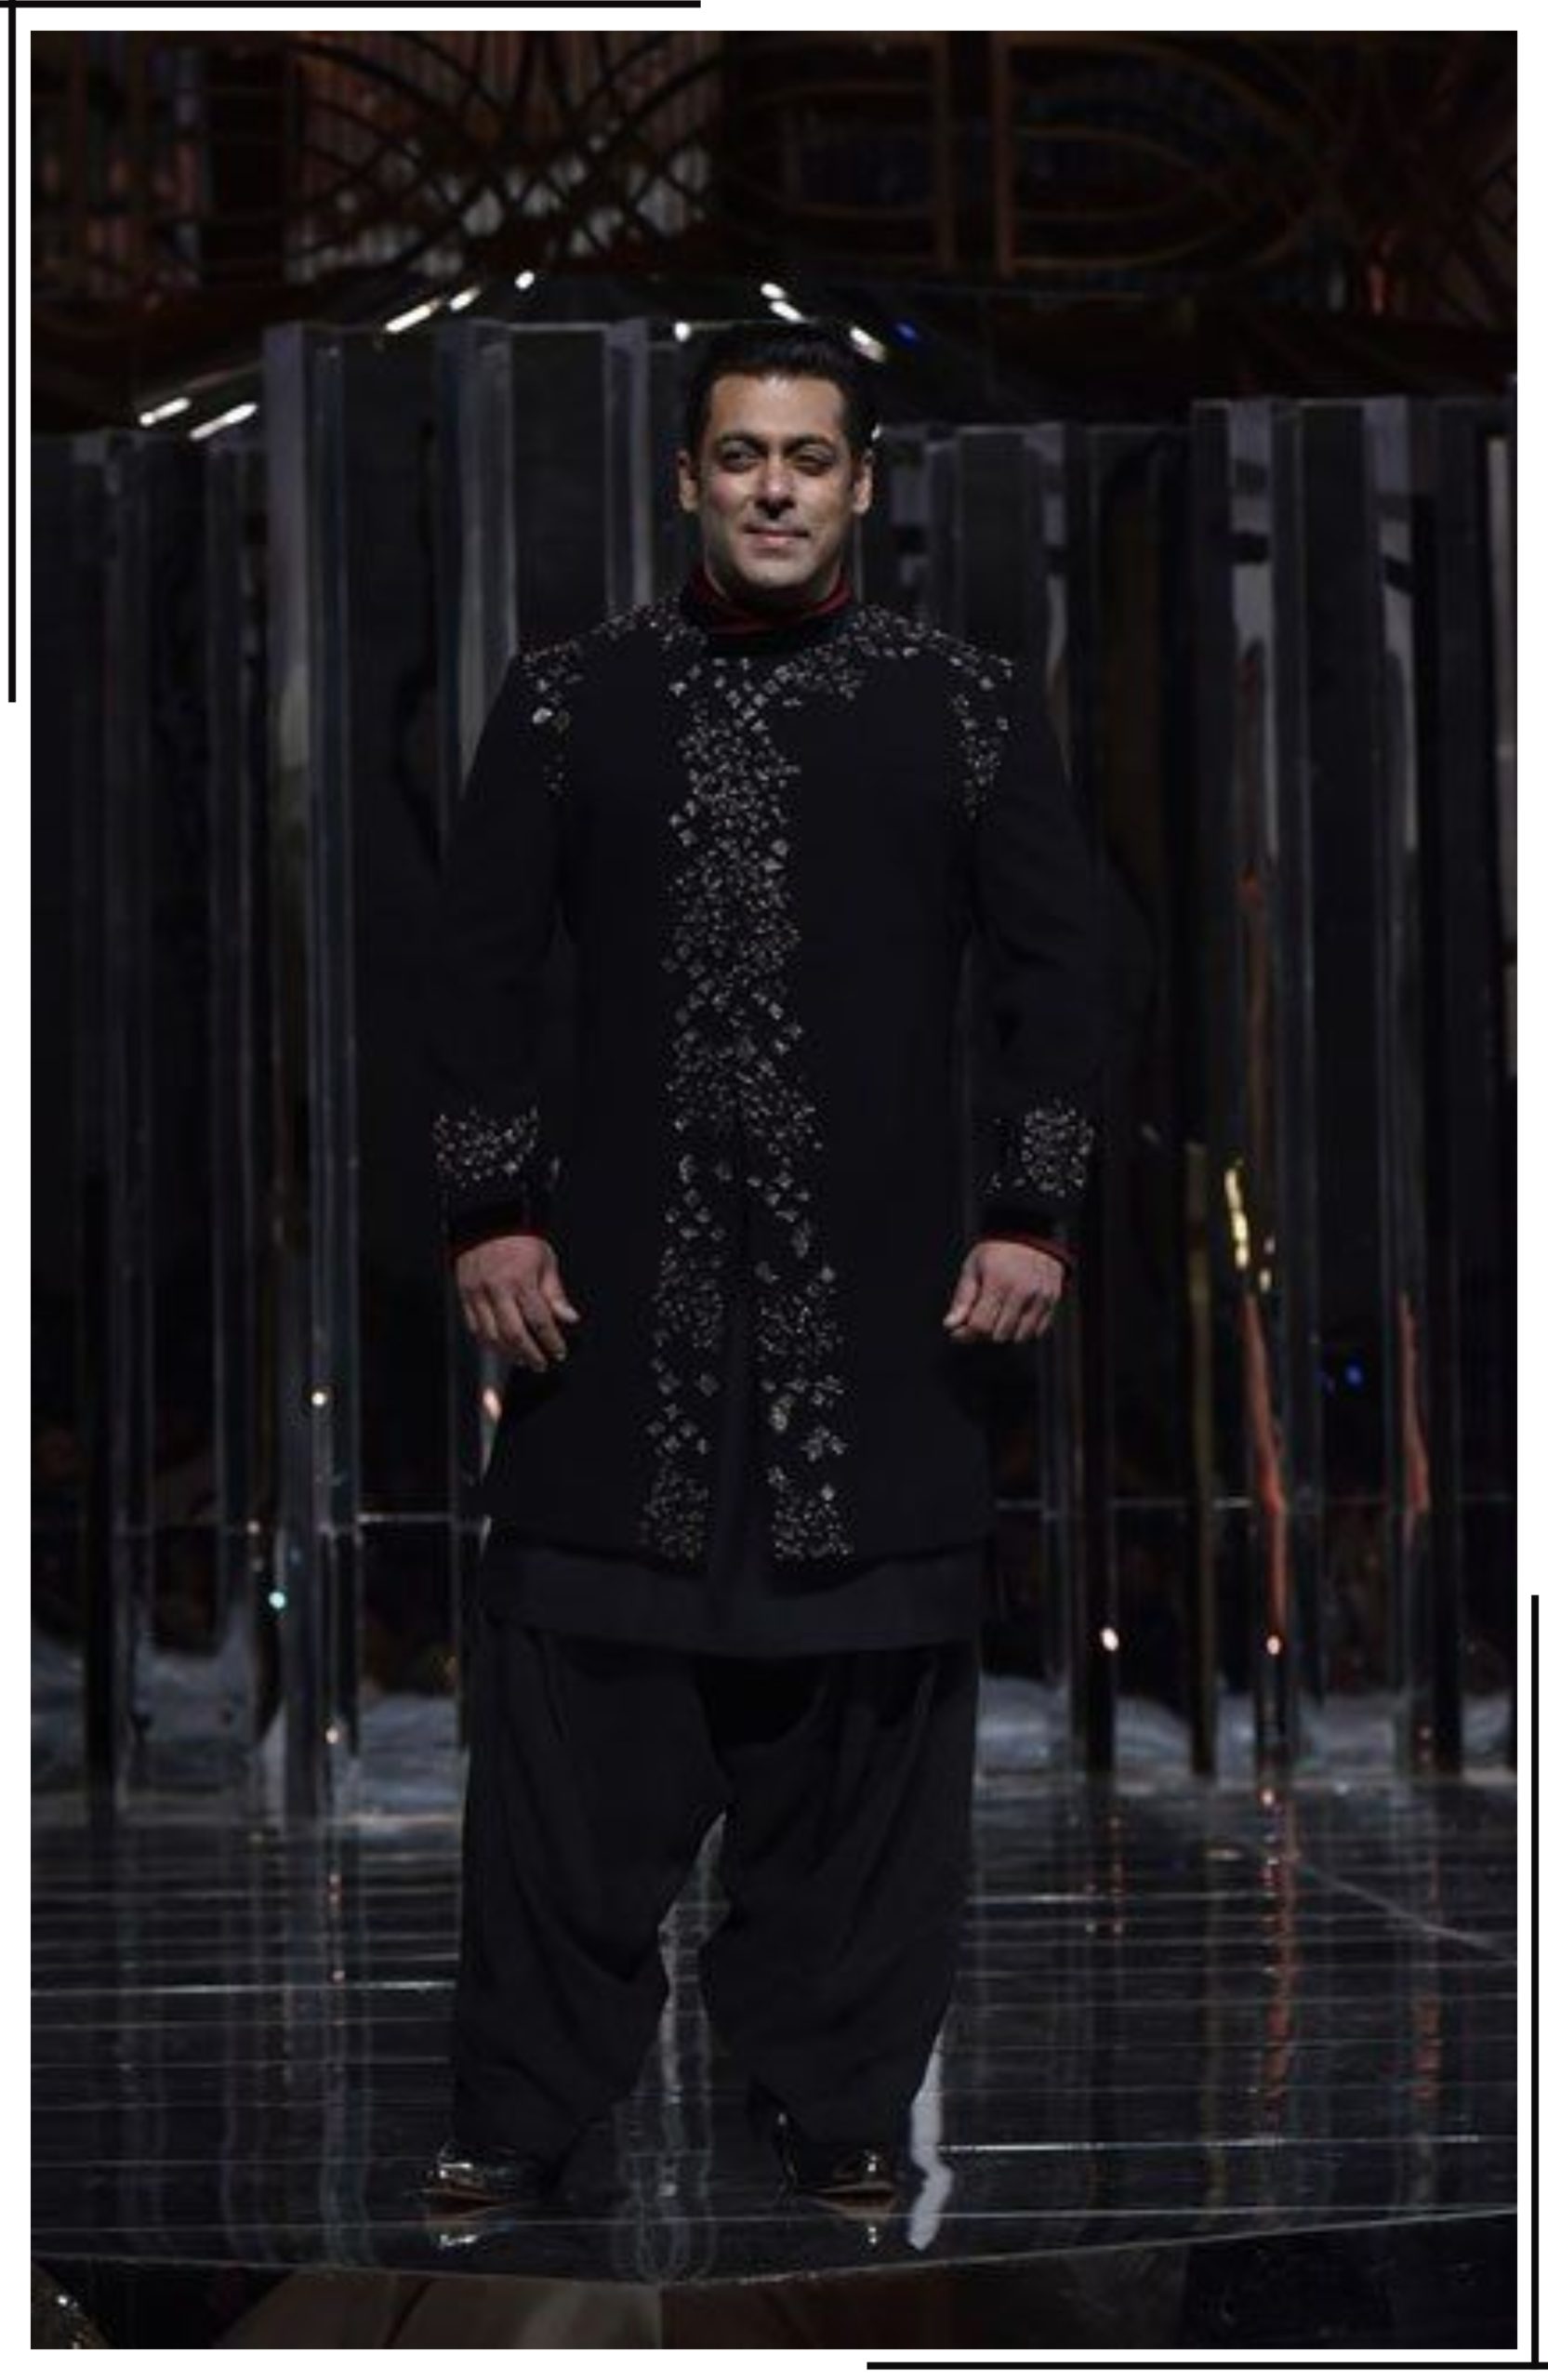 Design of pathani suit, Pathani suit for men